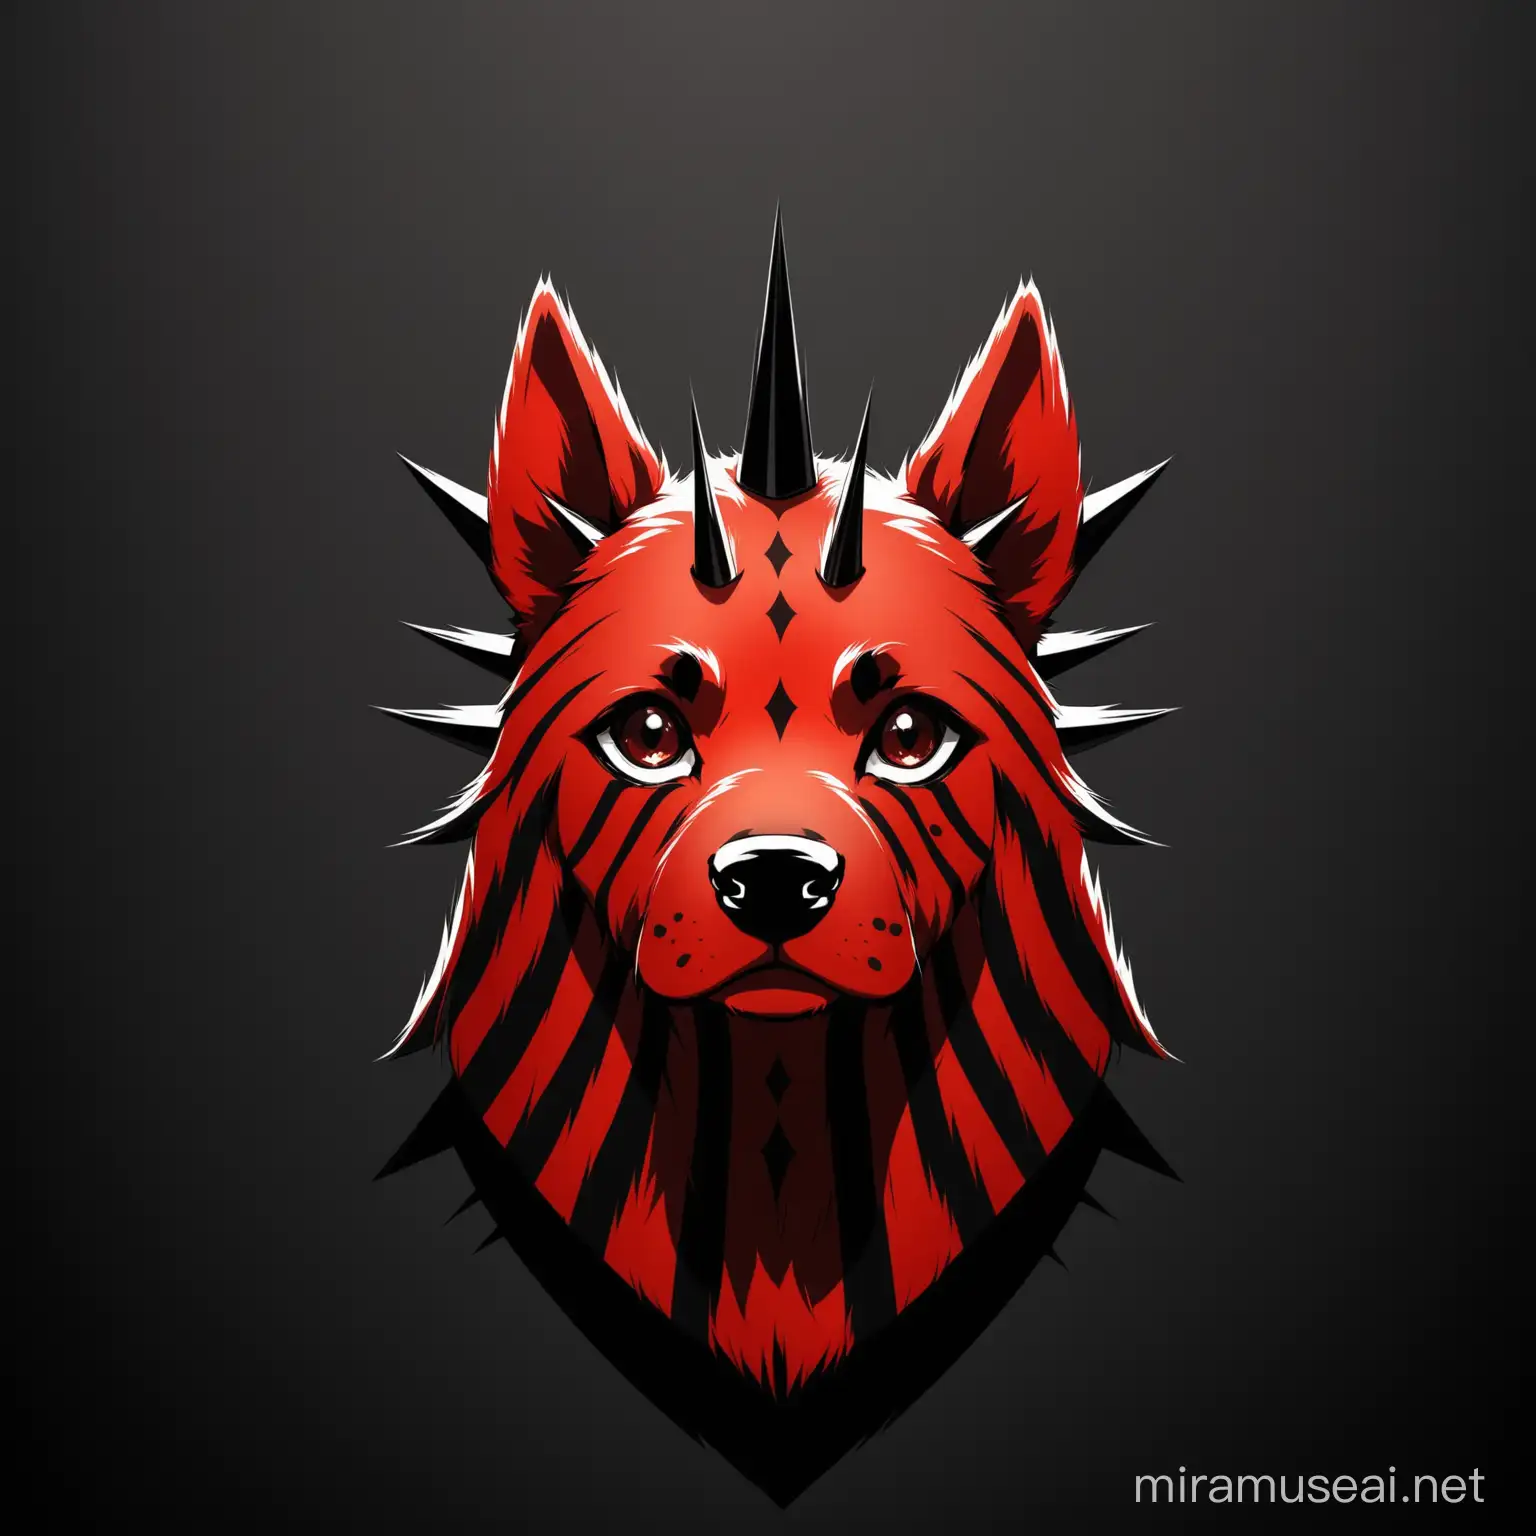 Red Striped Dog with Spiky Hair on Black Background